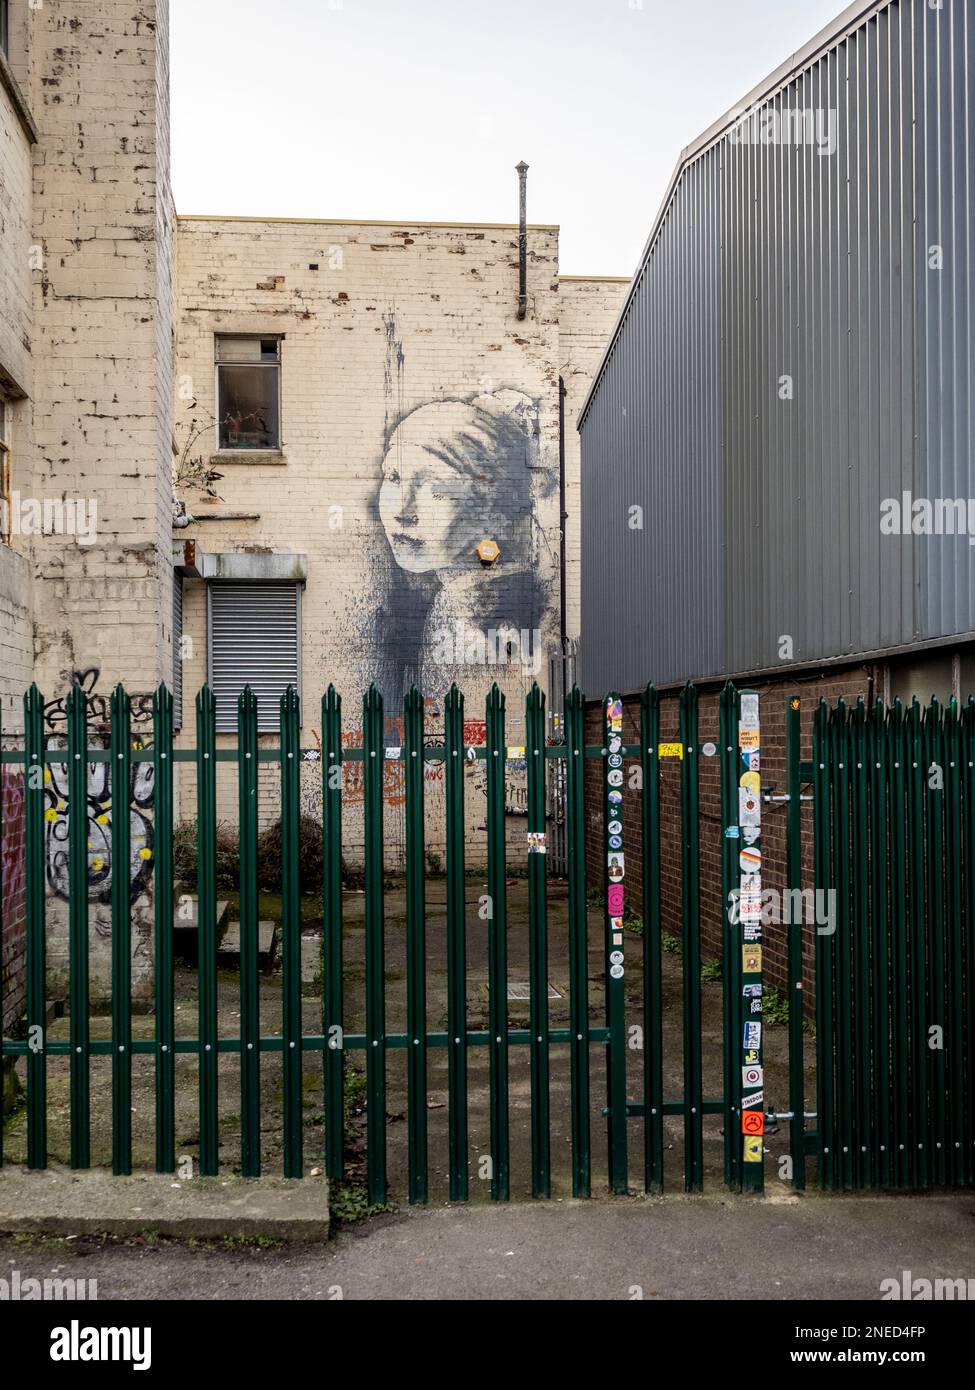 Banksy alleyway graffiti mural, The Girl with the Pierced Eardrum (inspired by Vermeer's painting) protected by a metal security fence. Bristol. UK Stock Photo